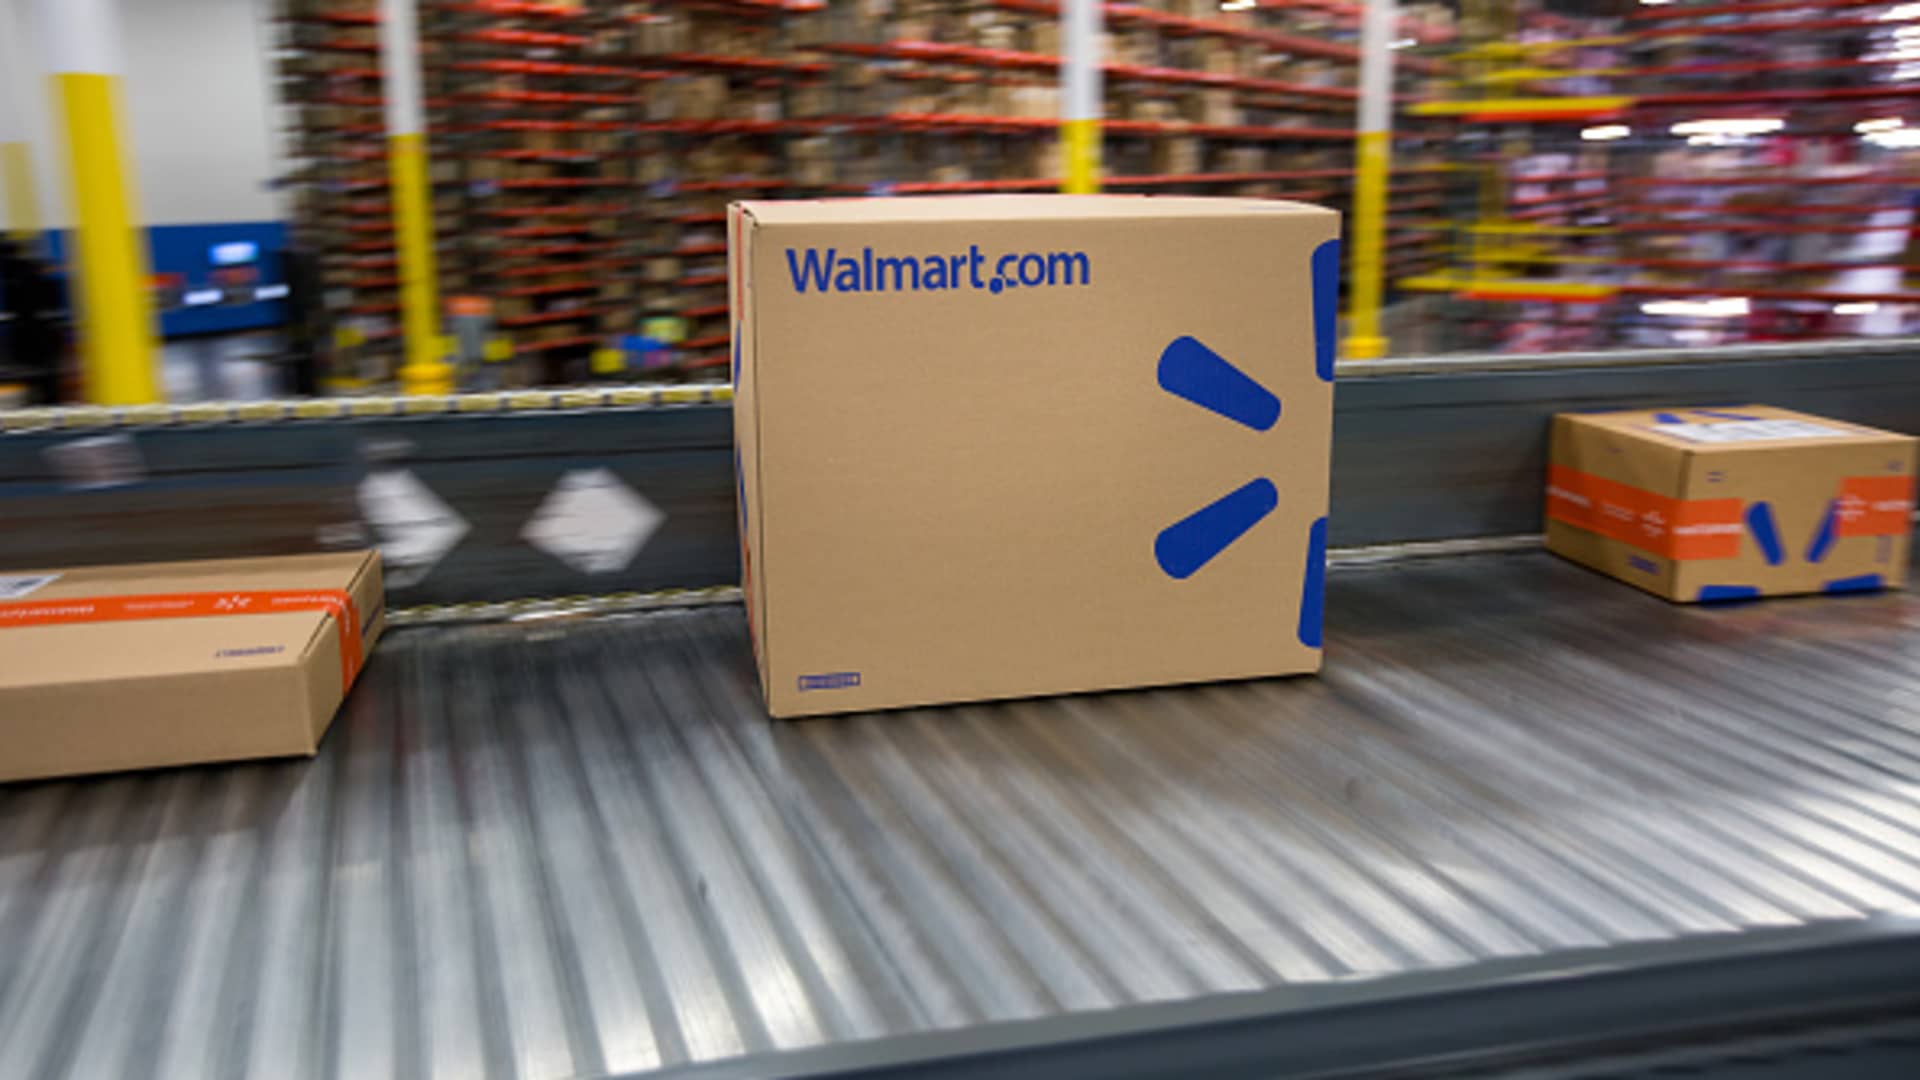 Walmart bets on its thousands of stores as it seeks to take e-commerce market share from Amazon